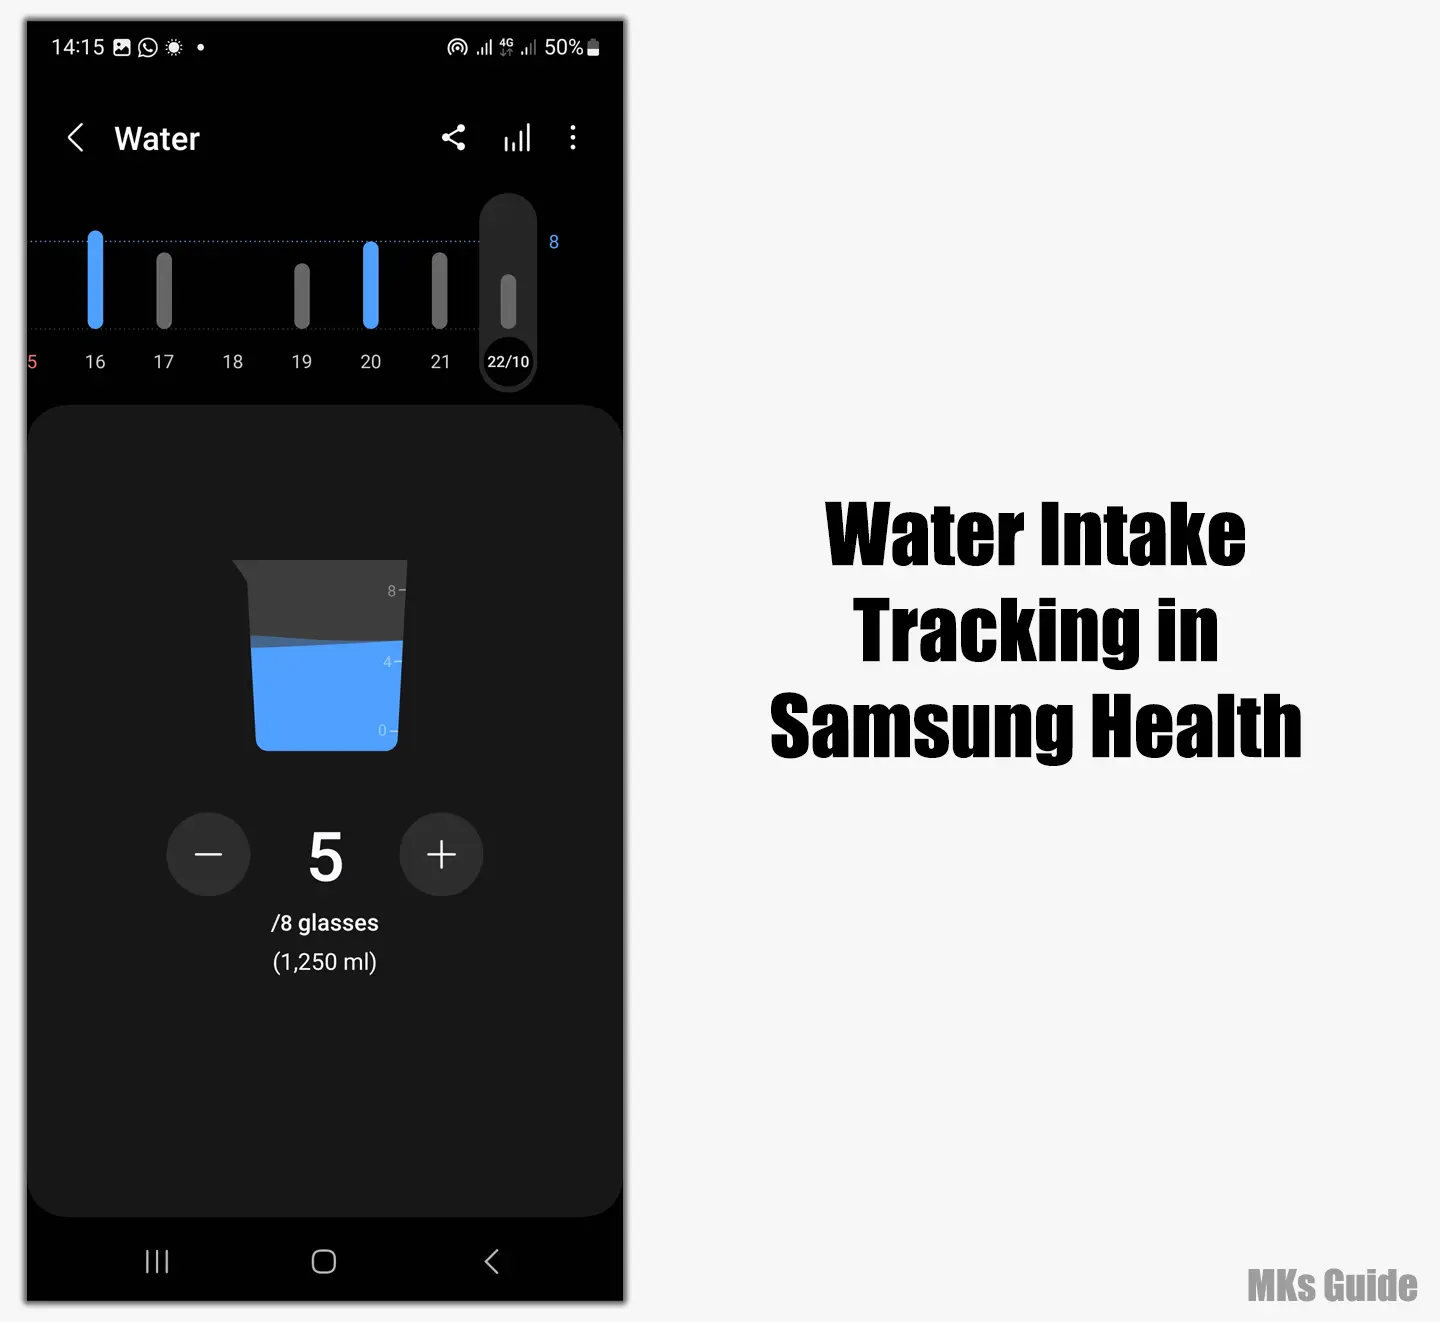 Water Intake in Samsung Health